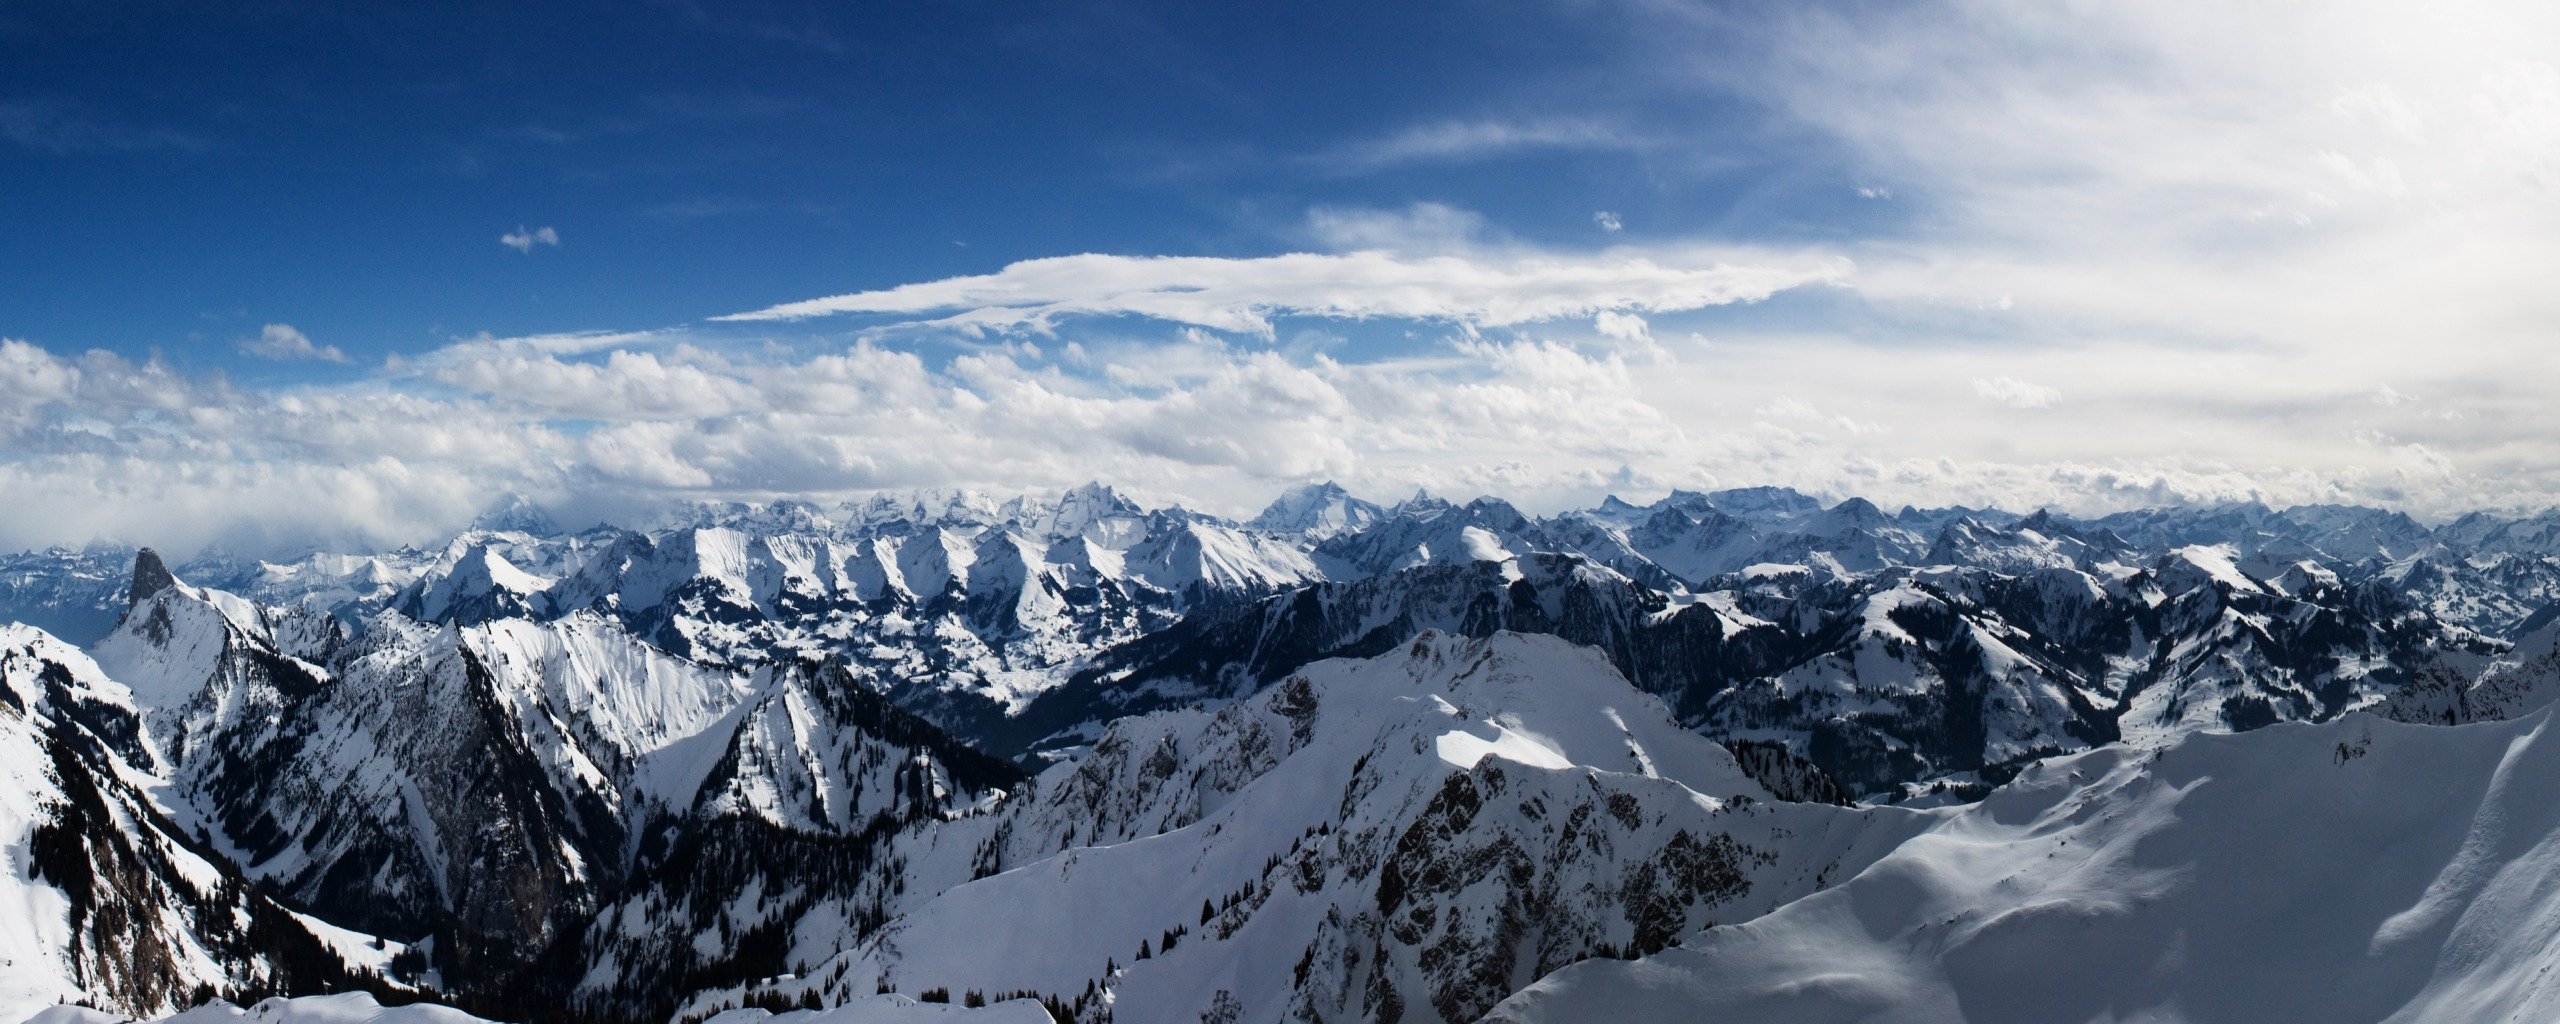 alps, Mountains, Nature, Snow, Sky, Clouds Wallpaper